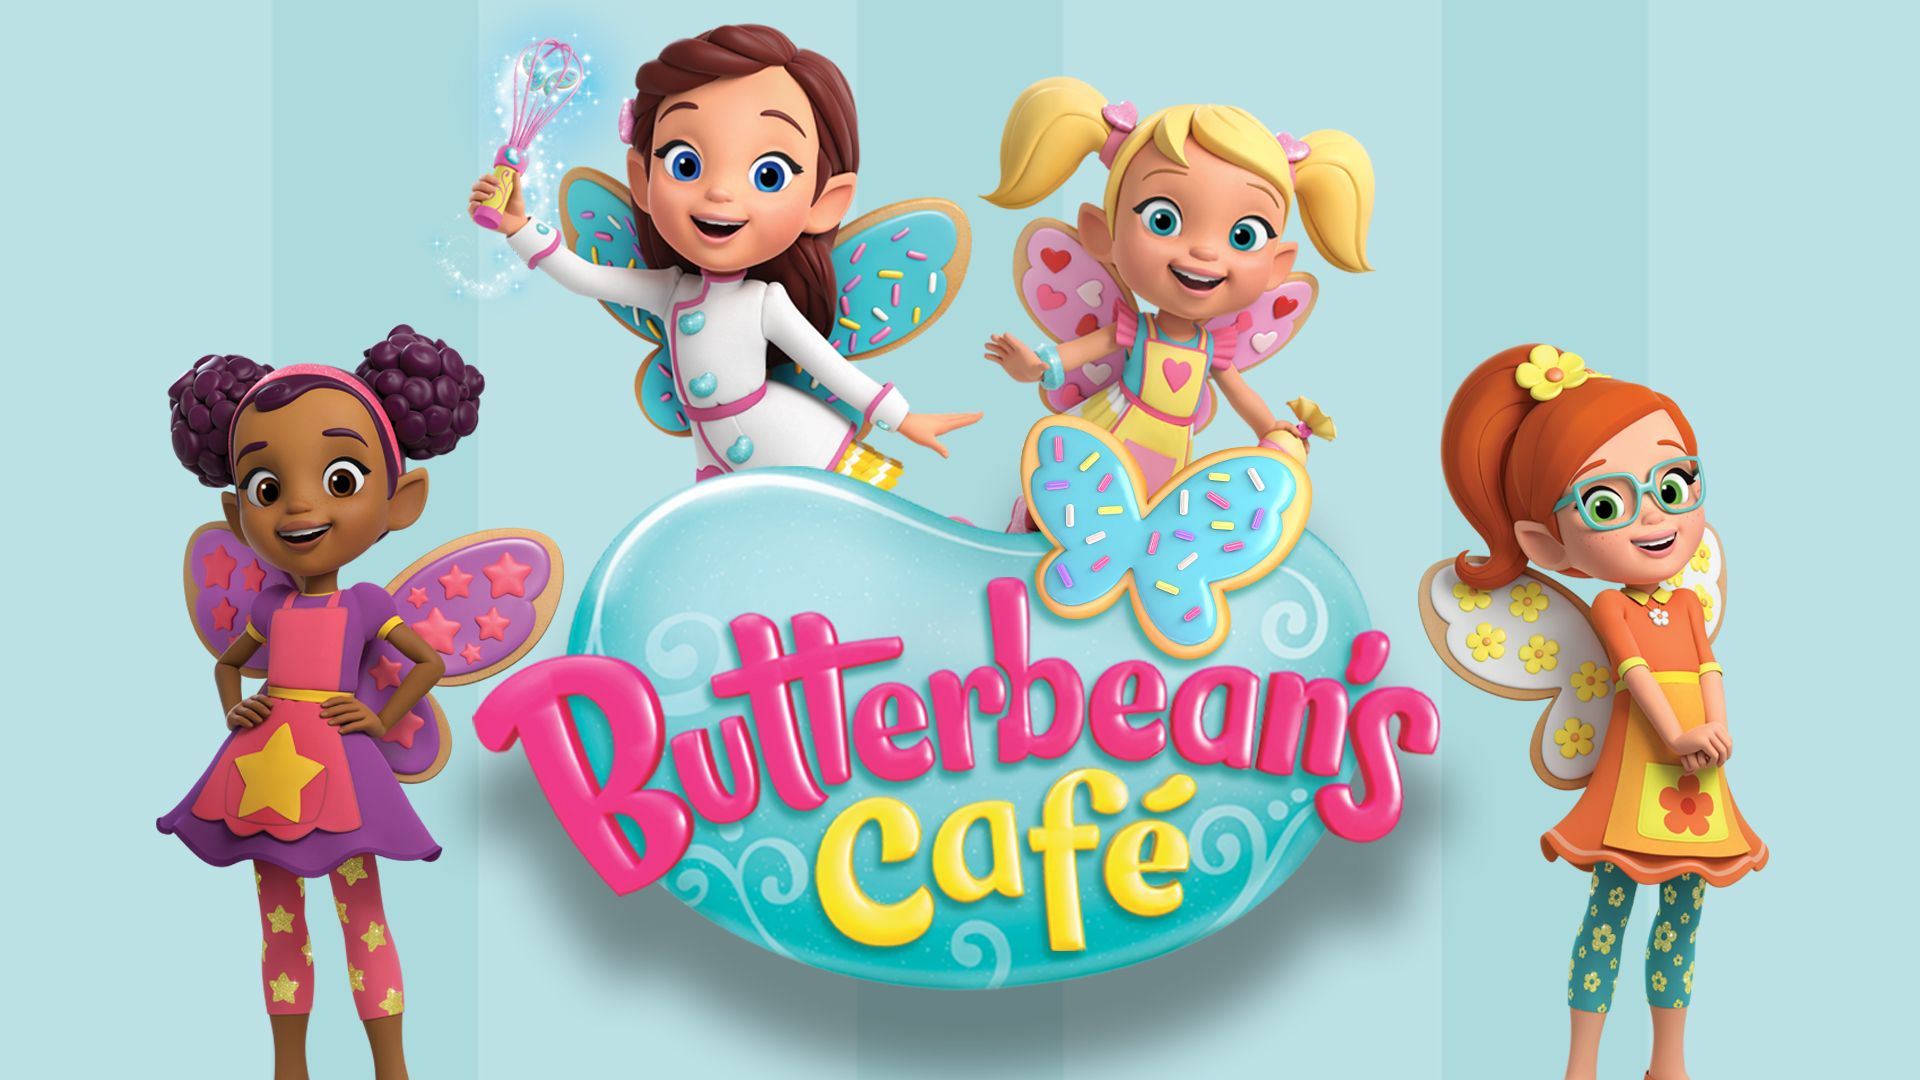 Tons of awesome Butterbean's Cafe wallpapers to download for free. 